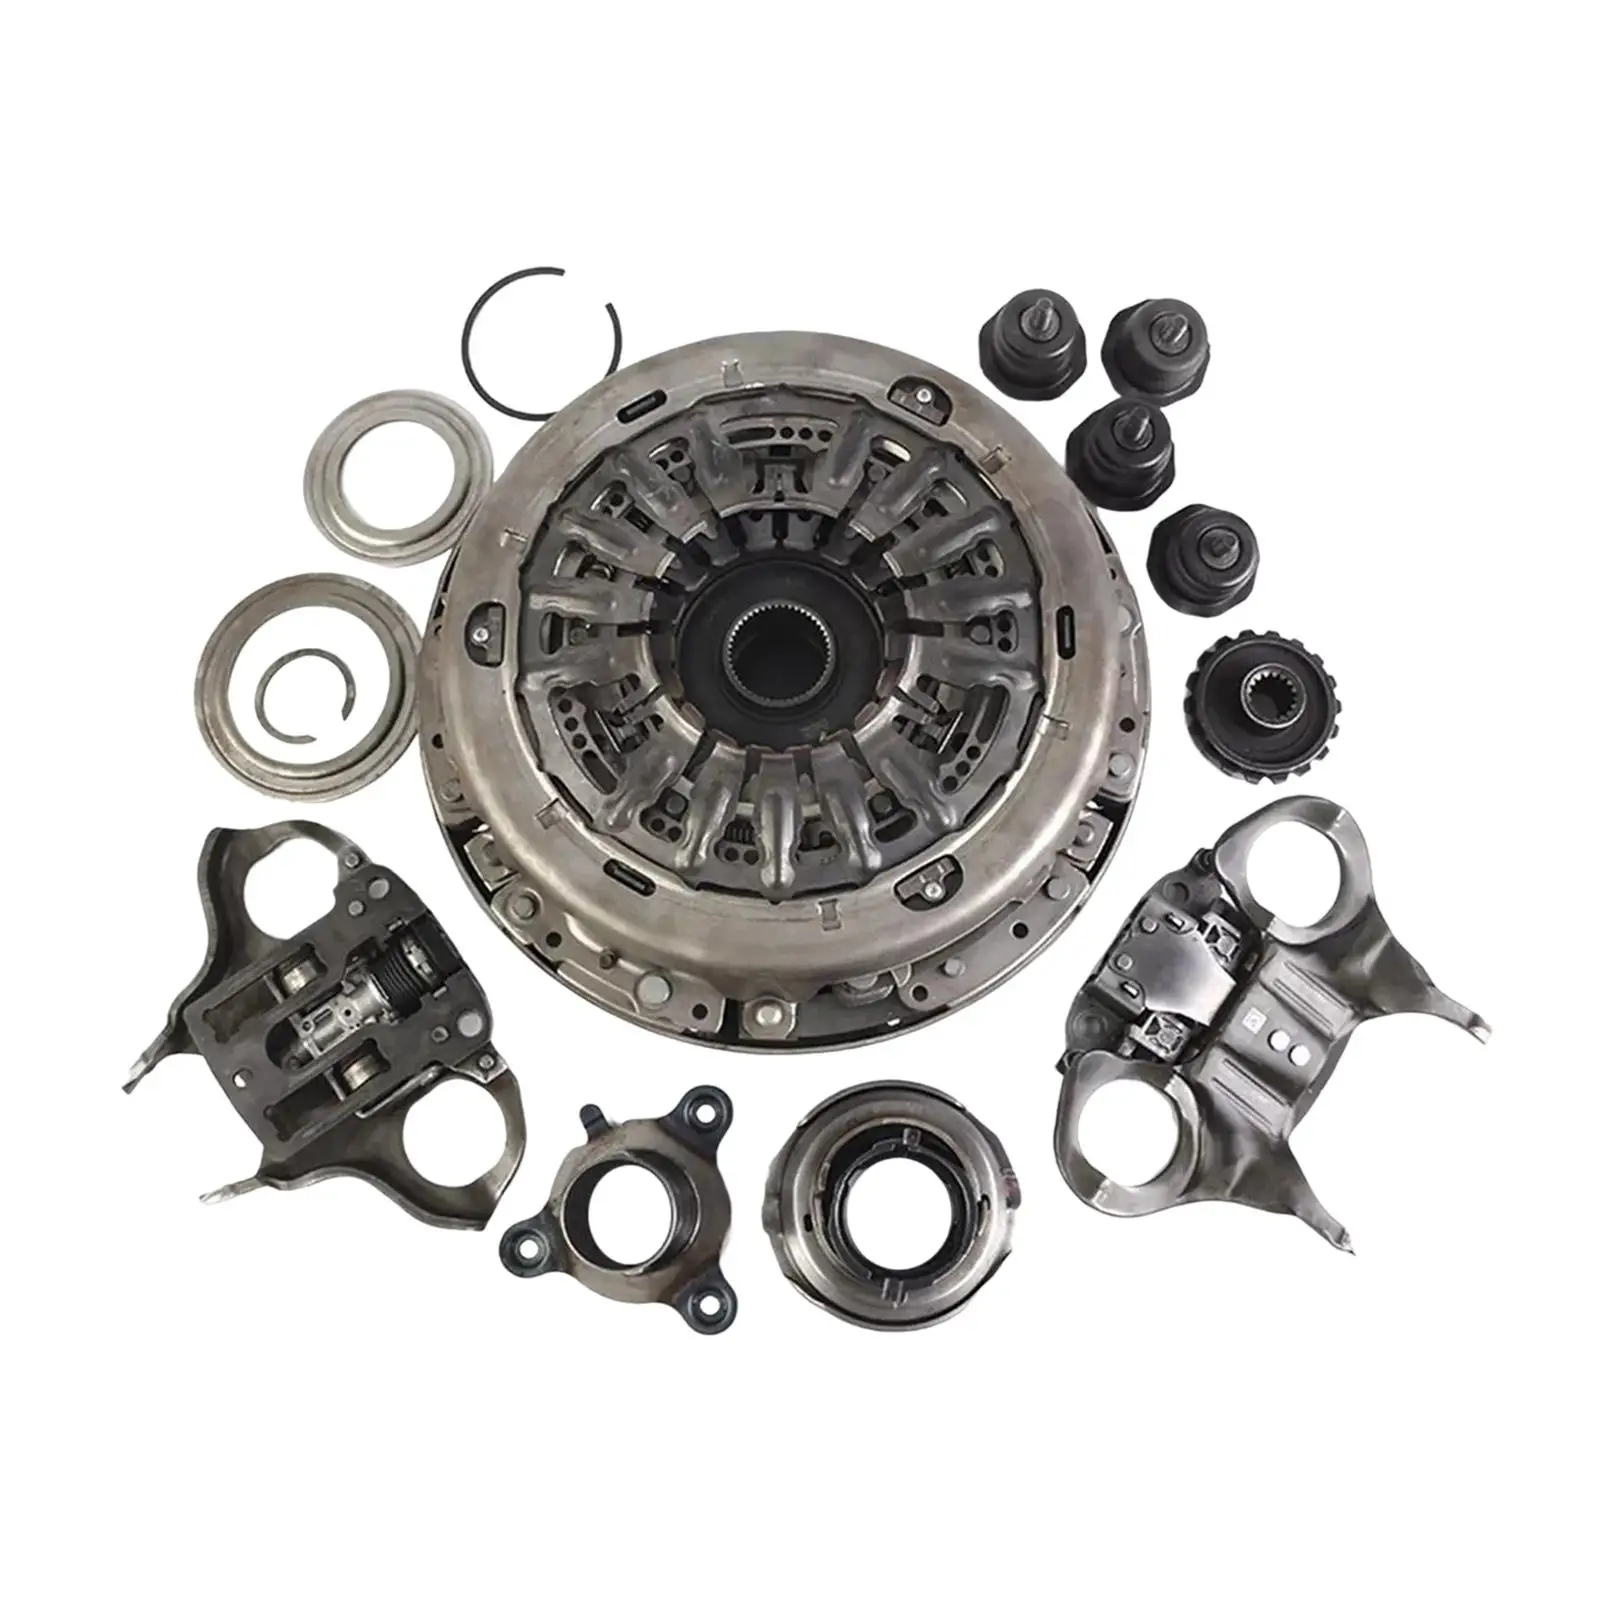 

Automatic Transmission Clutch Set 6Dct250 Dps6 for Ford Focus Accessory Easily Install